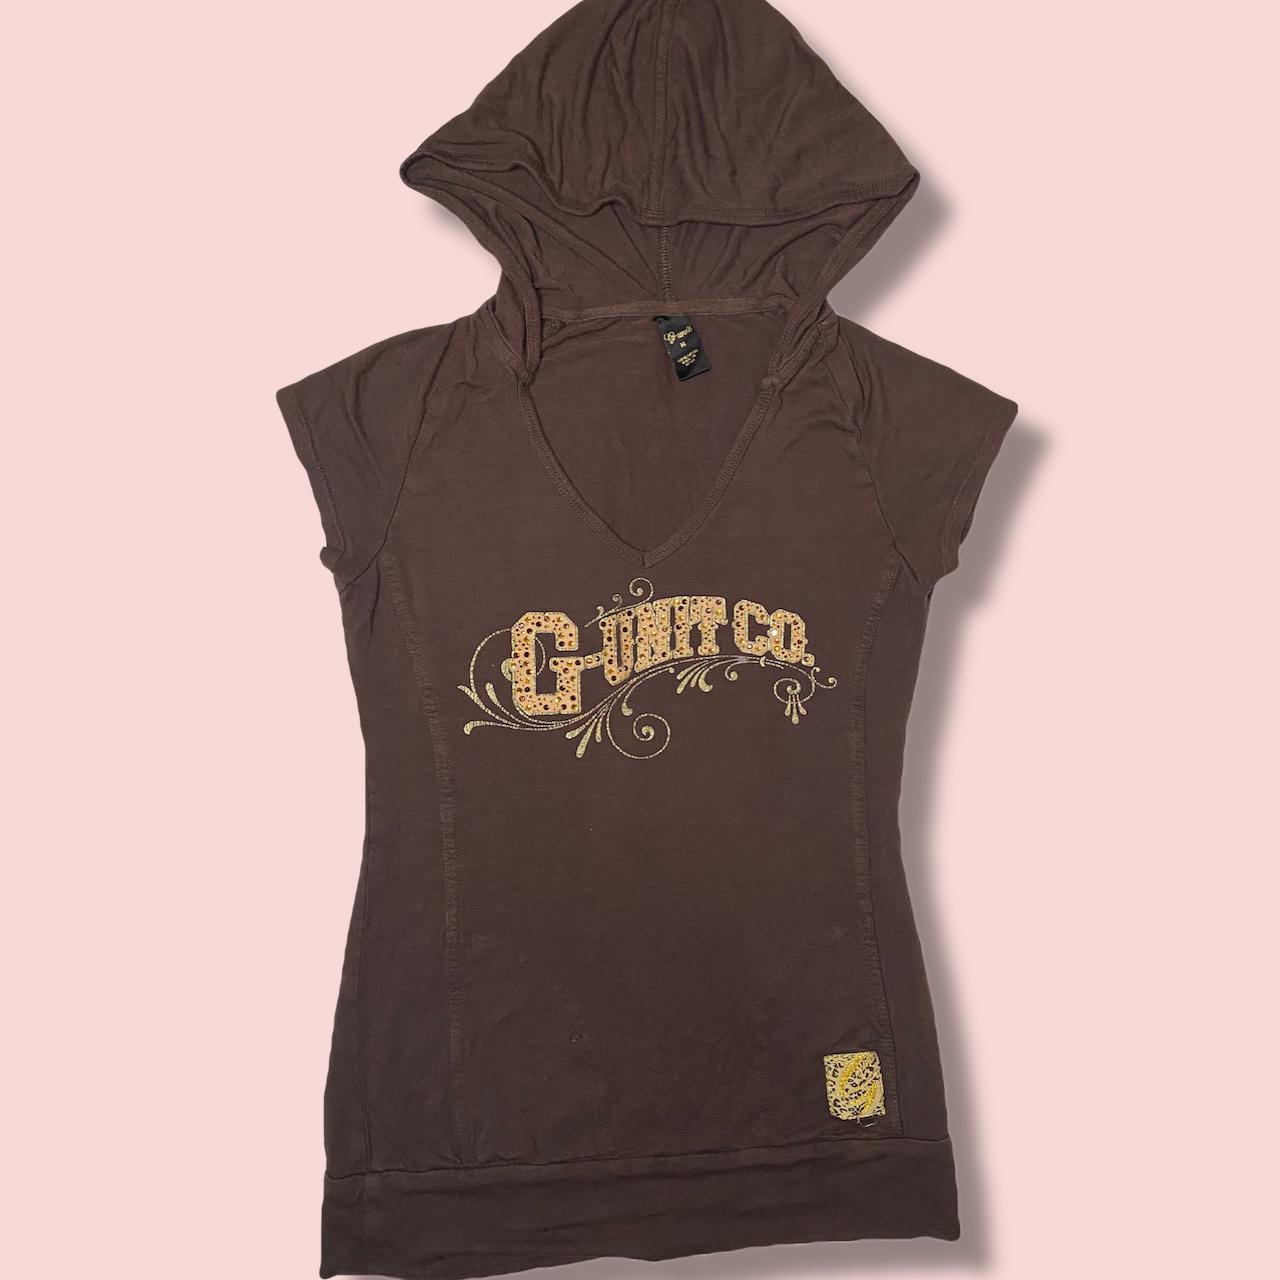 Women's Brown and Gold T-shirt